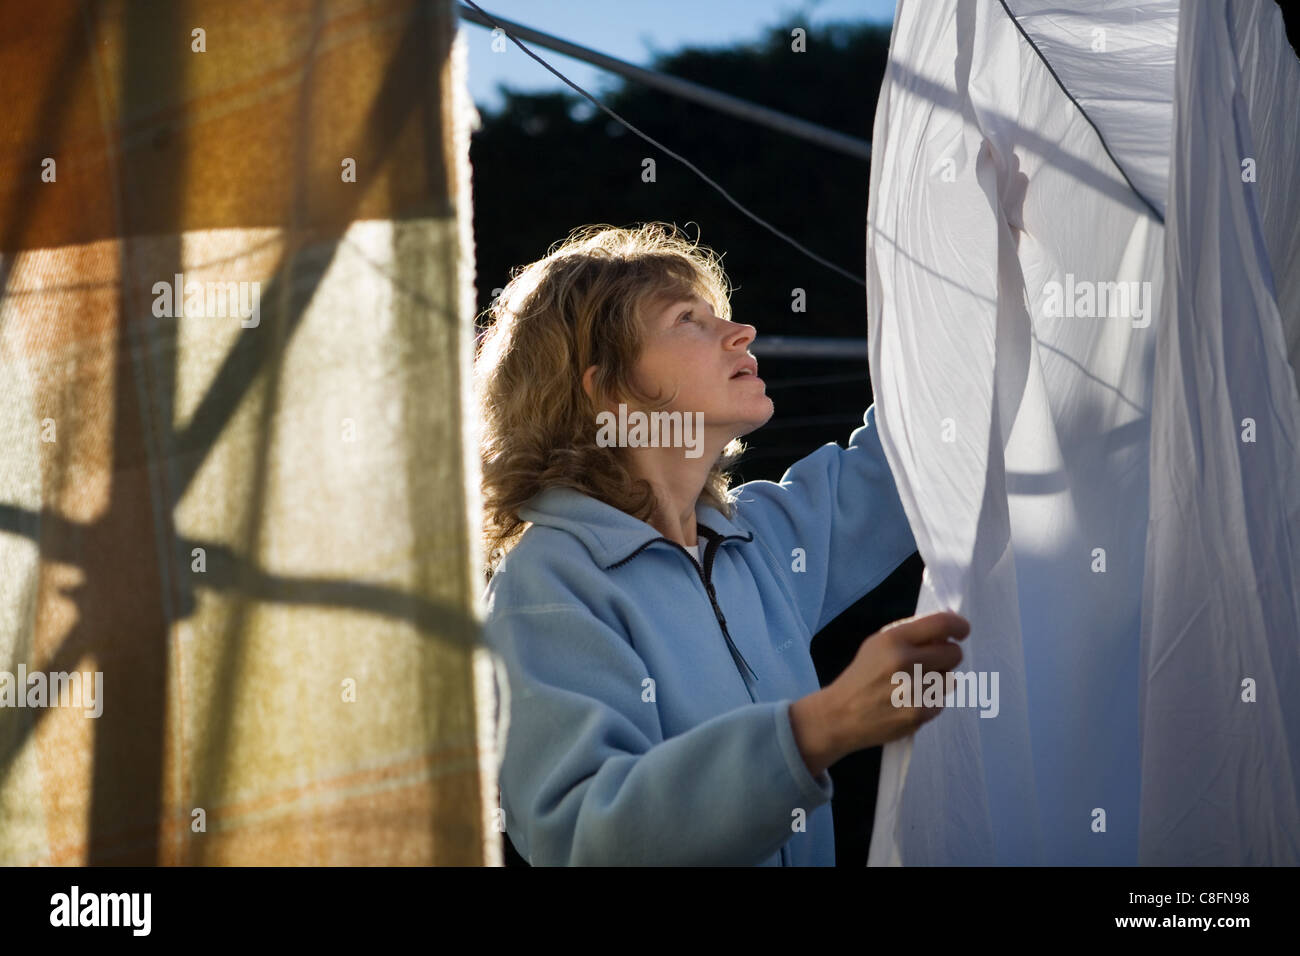 Woman drying clothes, New Zealand Stock Photo